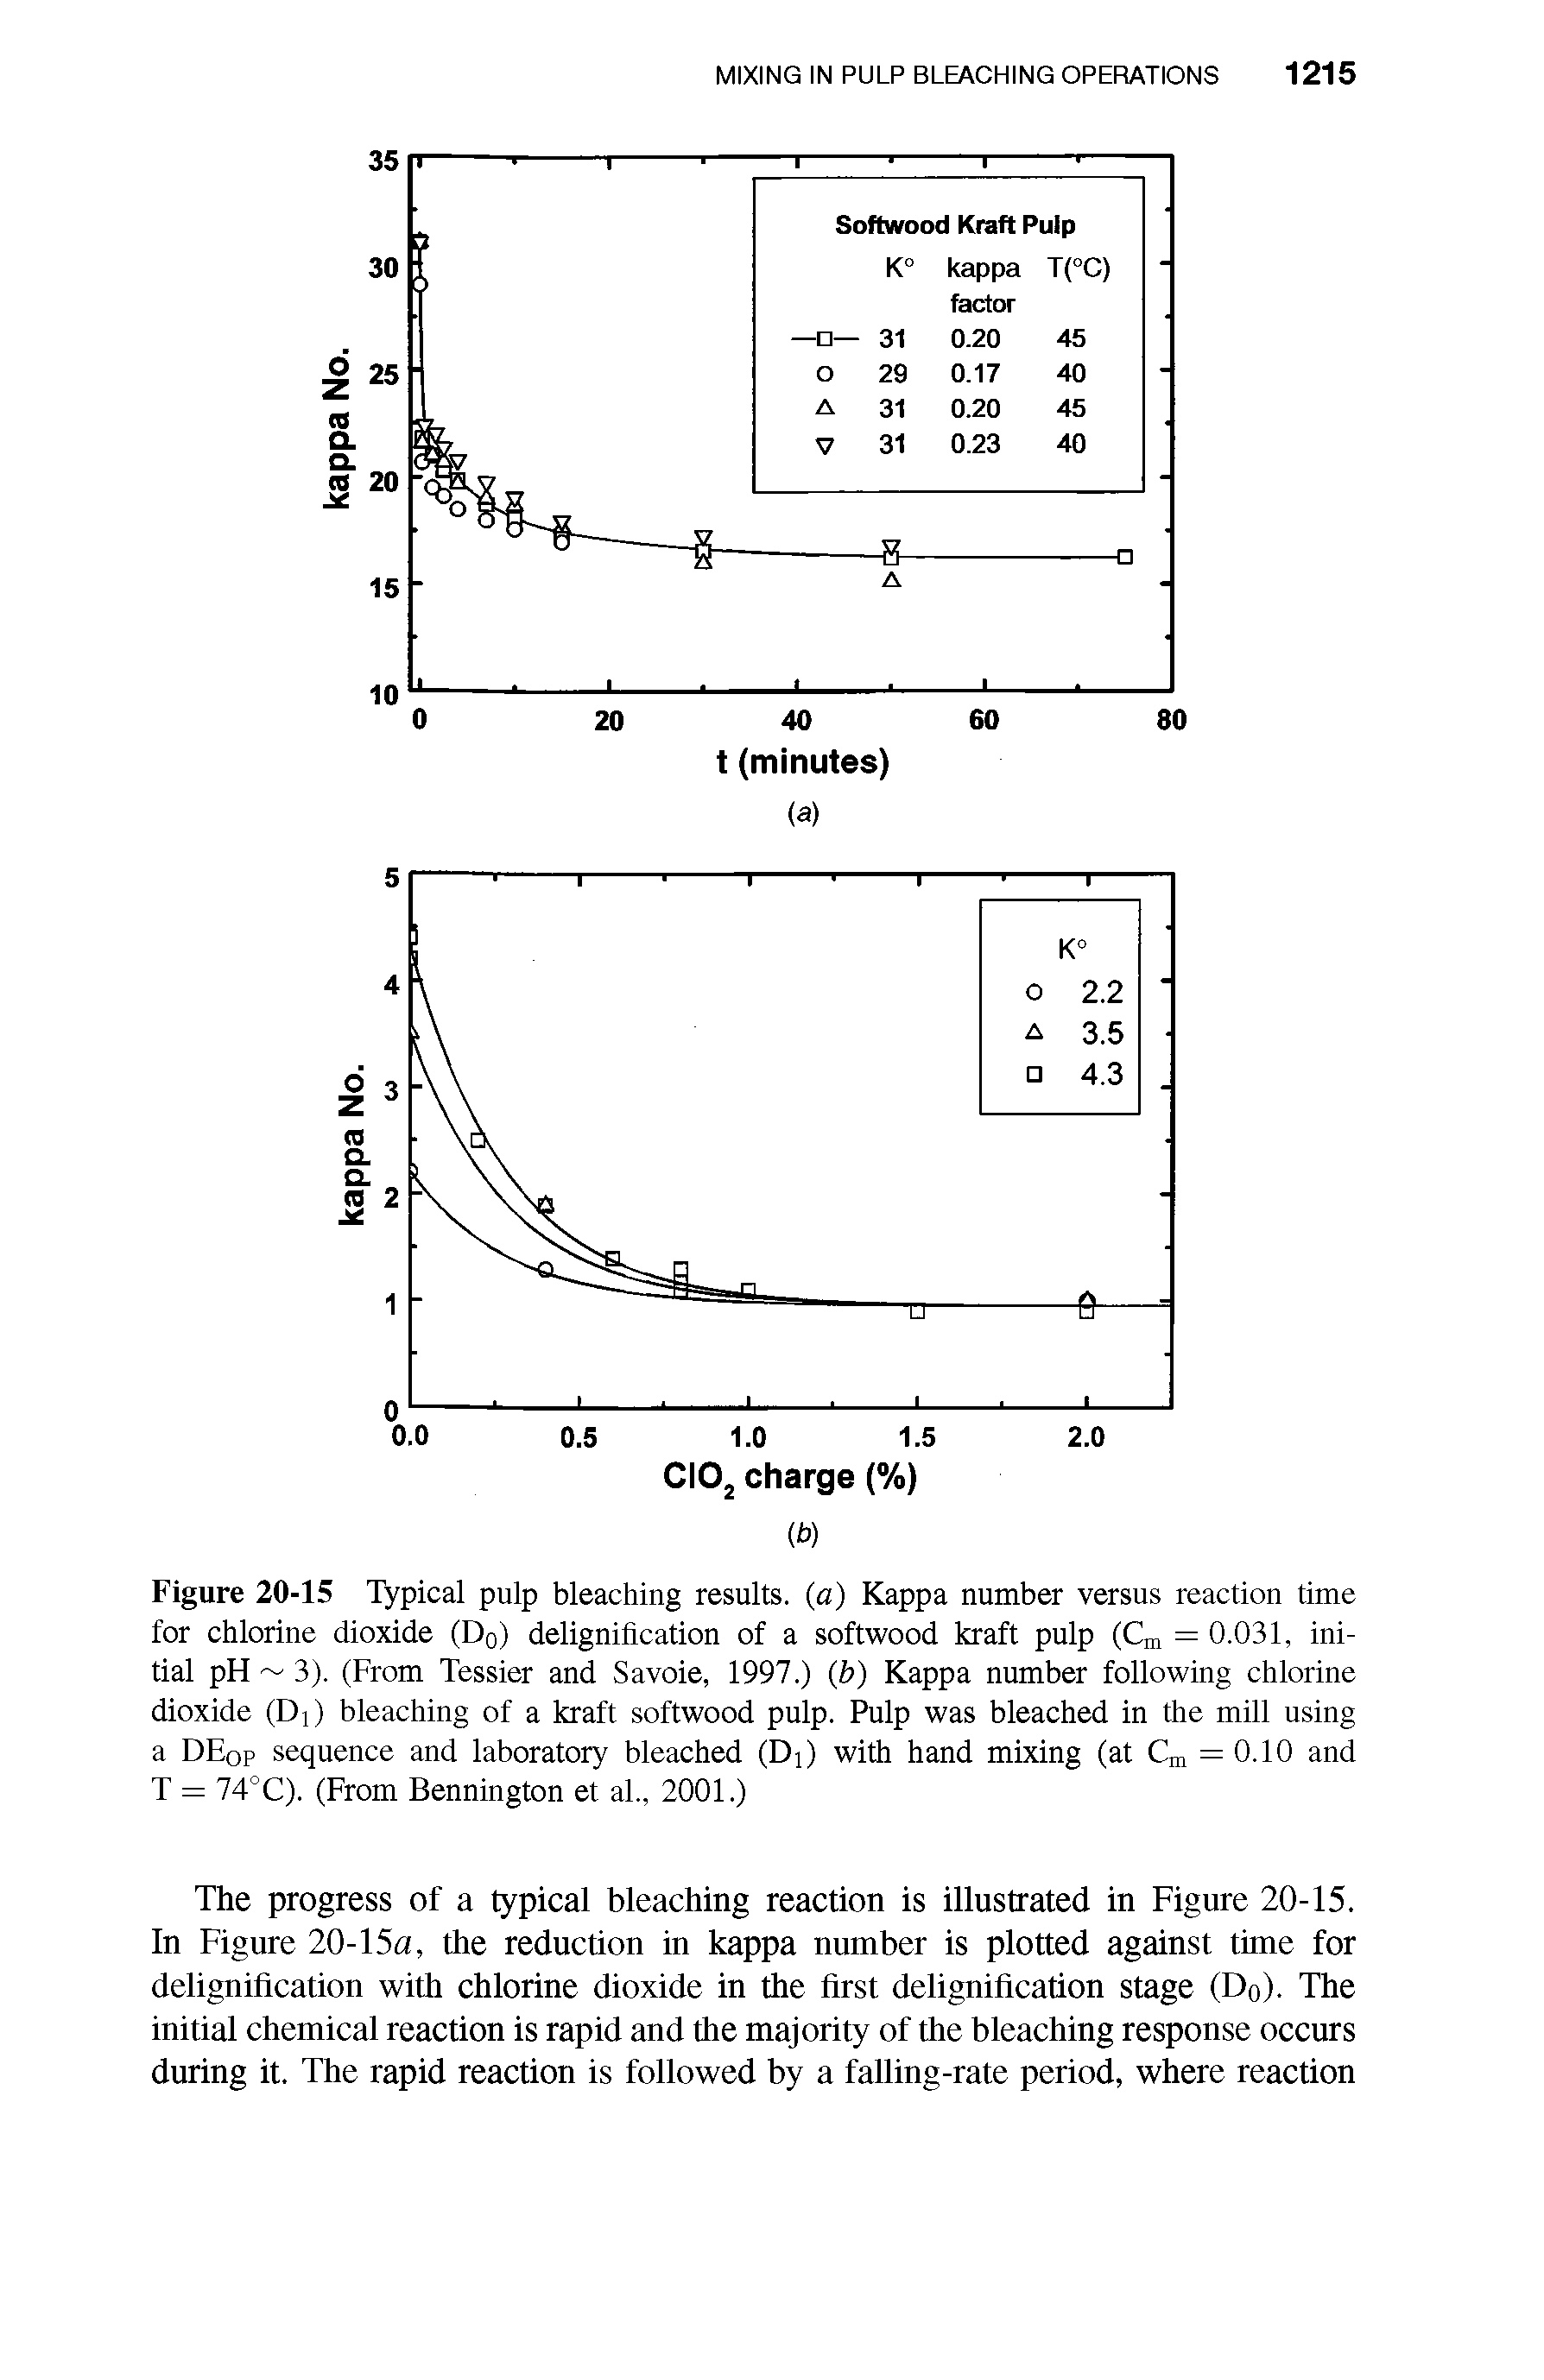 Figure 20-15 Typical pulp bleaching results, a) Kappa number versus reaction time for chlorine dioxide (Dq) delignification of a softwood kraft pulp (Cm = 0.031, initial pH 3). (From Tessier and Savoie, 1997.) (b) Kappa number following chlorine dioxide (Di) bleaching of a kraft softwood pulp. Pulp was bleached in the mill using a DEop sequence and laboratory bleached (Di) with hand mixing (at Cm = 0.10 and T = 74°C). (From Bennington et al., 2001.)...